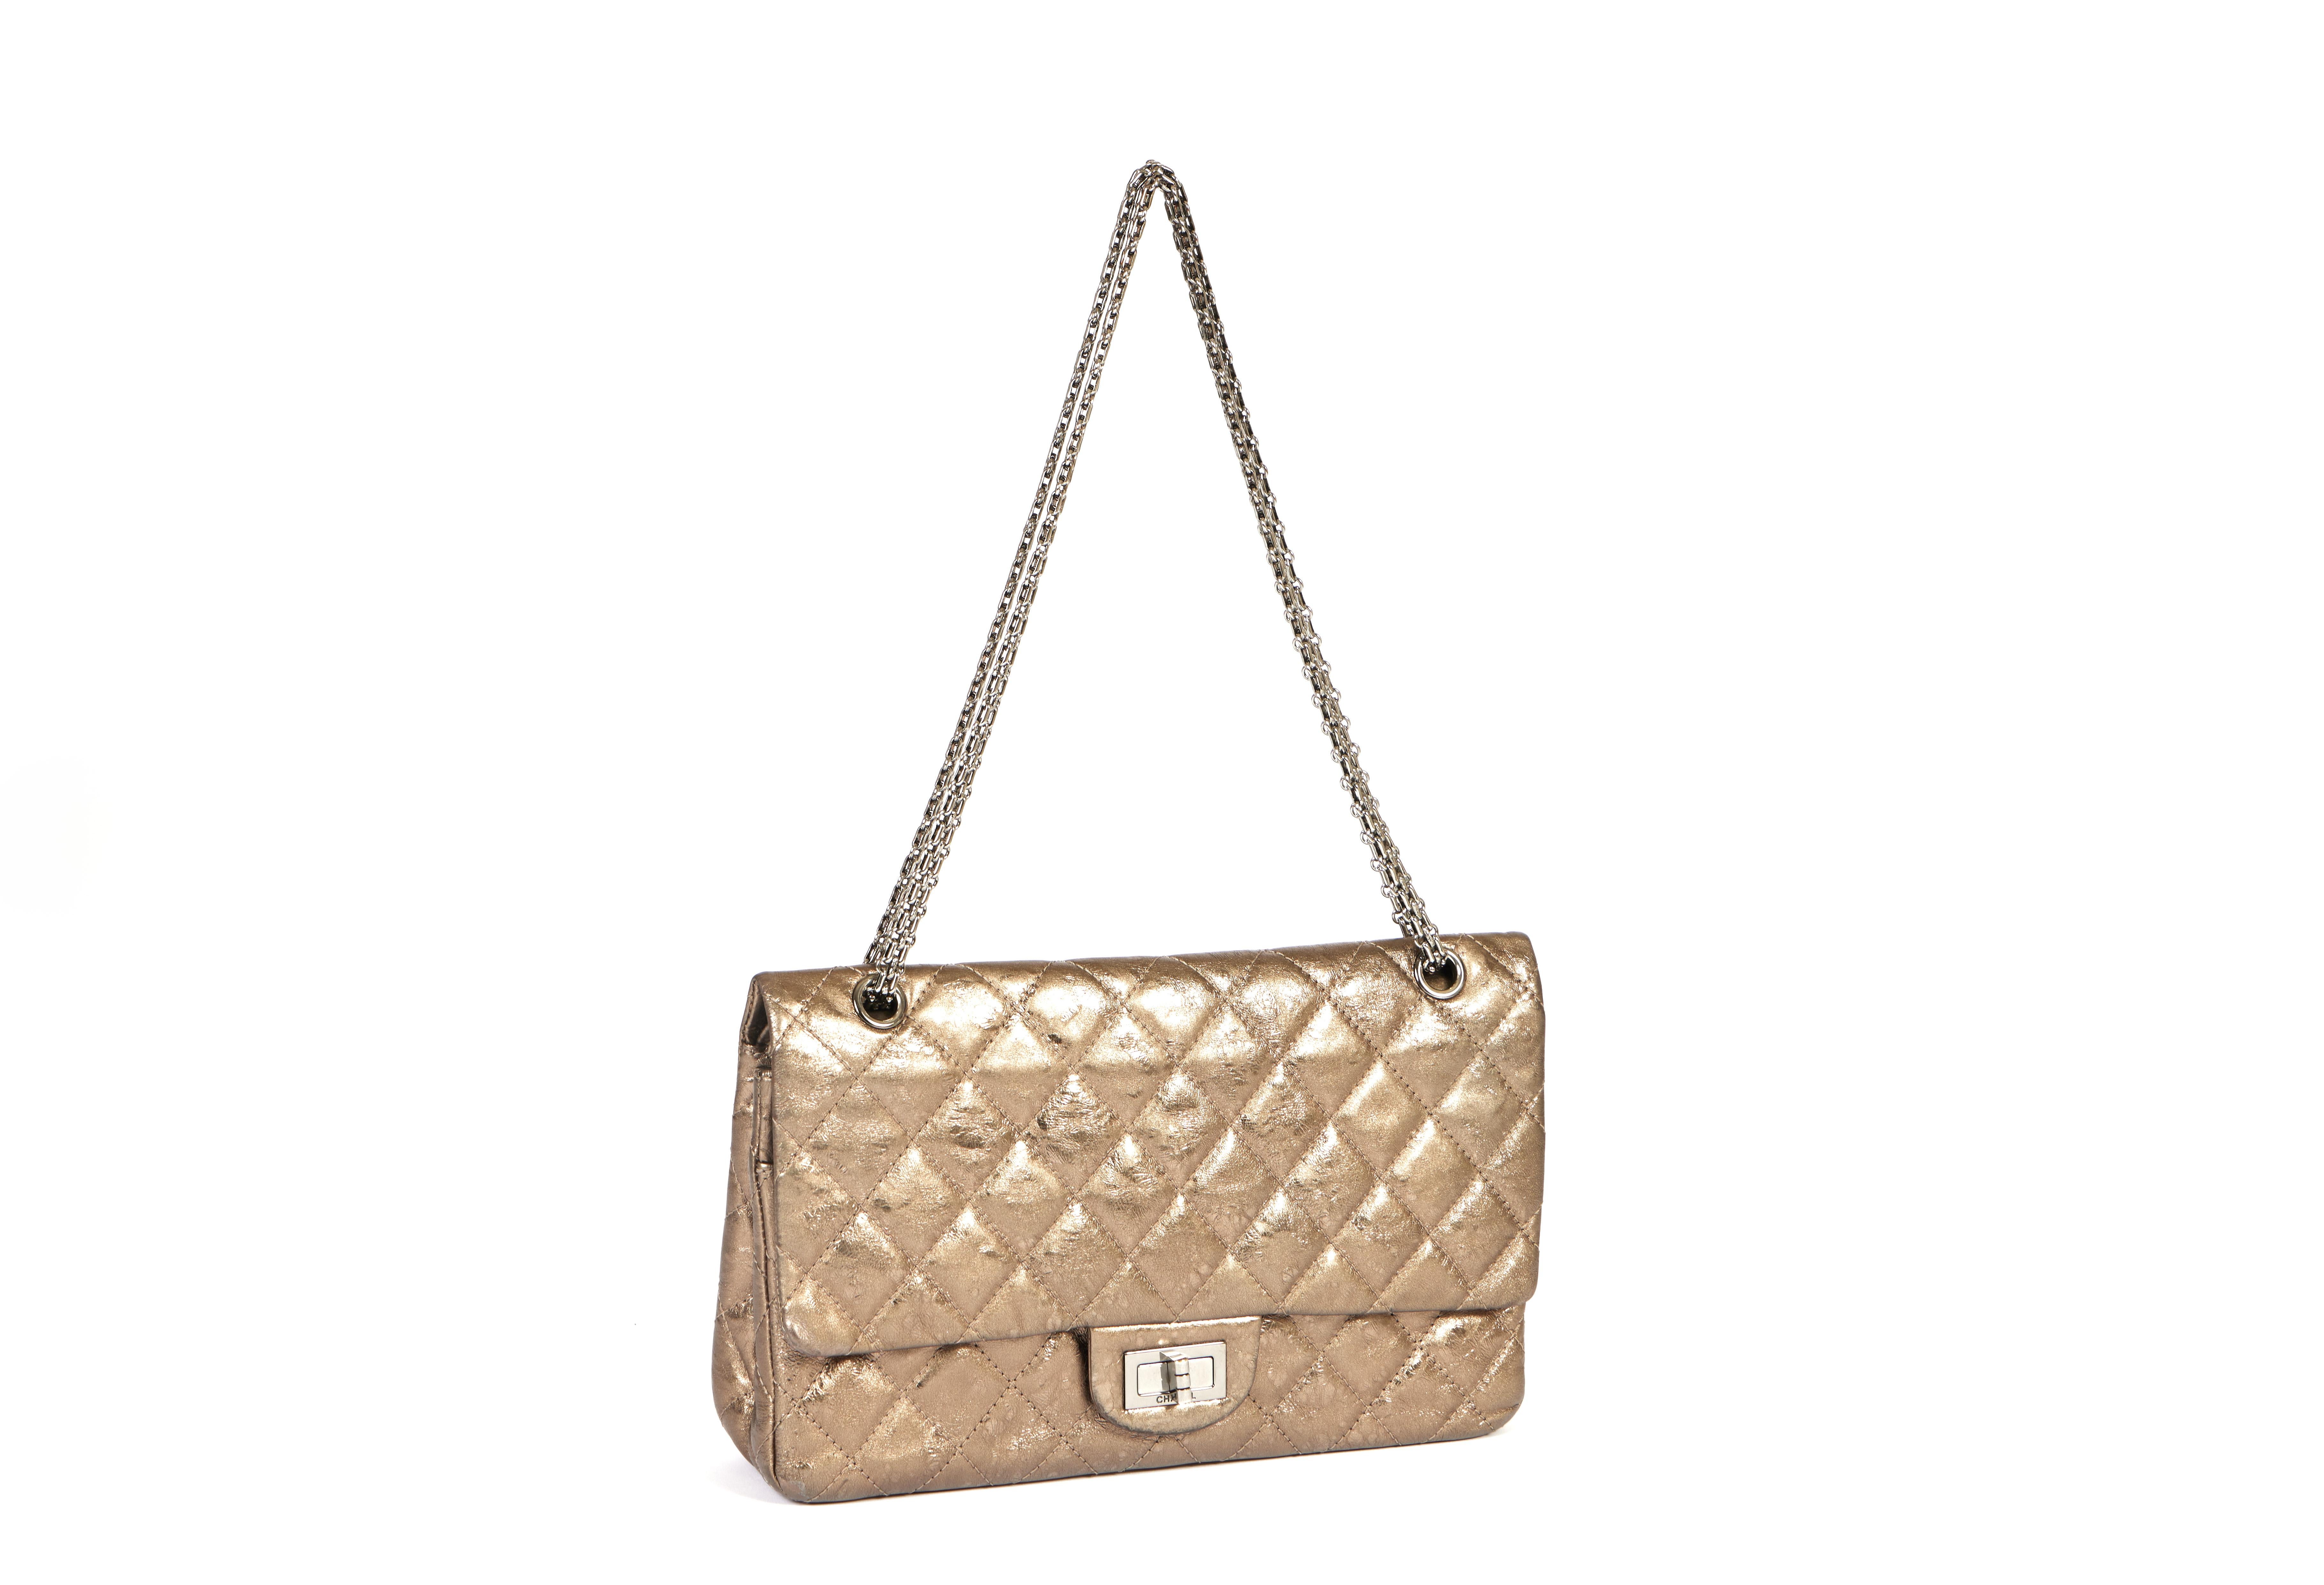 This Chanel 2.55 Reissue Size 227 bag comes in a metallic light bronze tone. The classic chain has a shoulder drop of 11 inches. The bag comes with the inventory card, booklet and Chanel dust bag. According to the hologram number the bag was made in